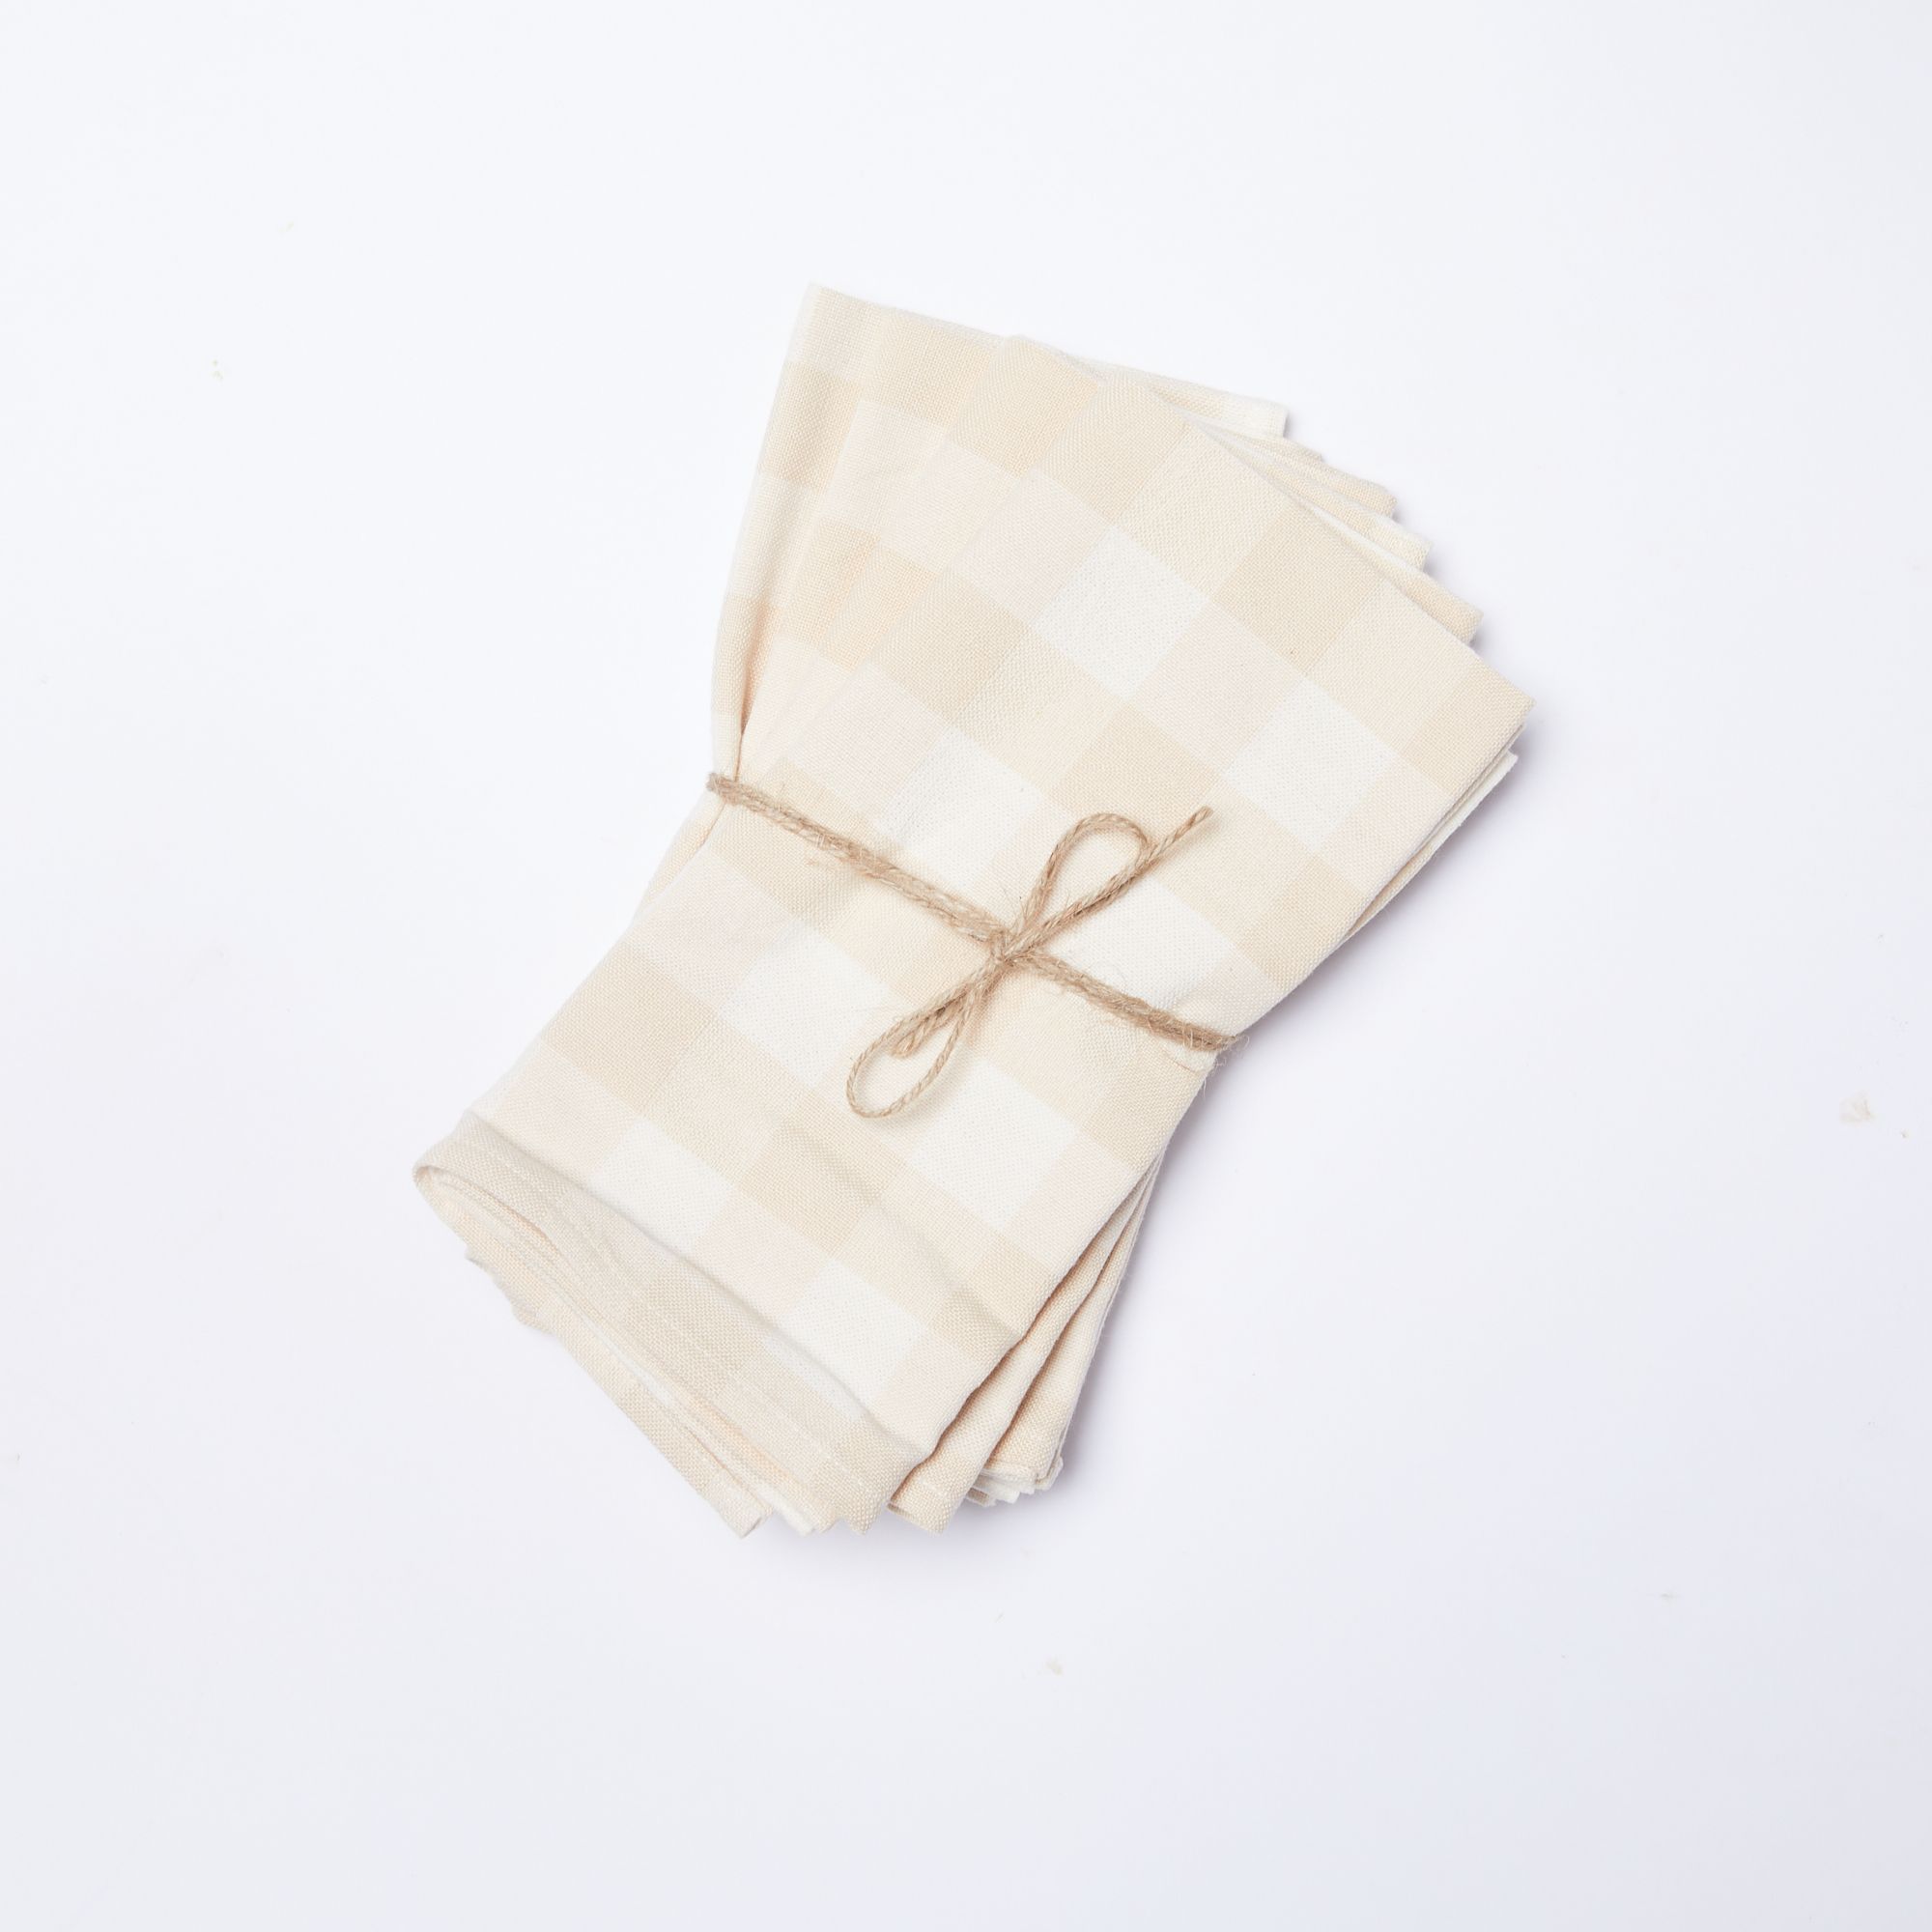 Stack of four cream and white gingham cotton napkins tied with a string